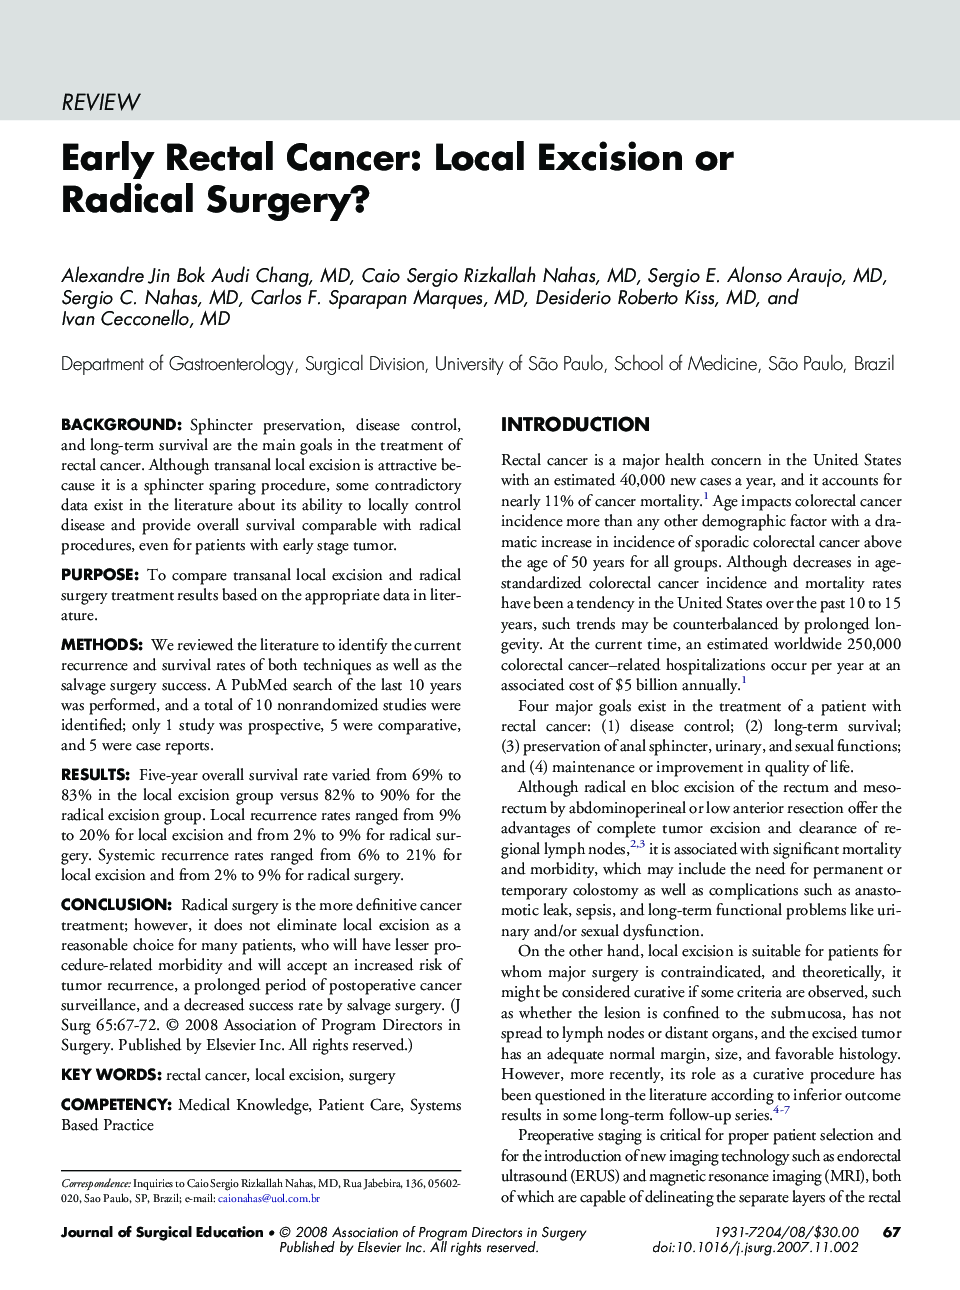 Early Rectal Cancer: Local Excision or Radical Surgery?